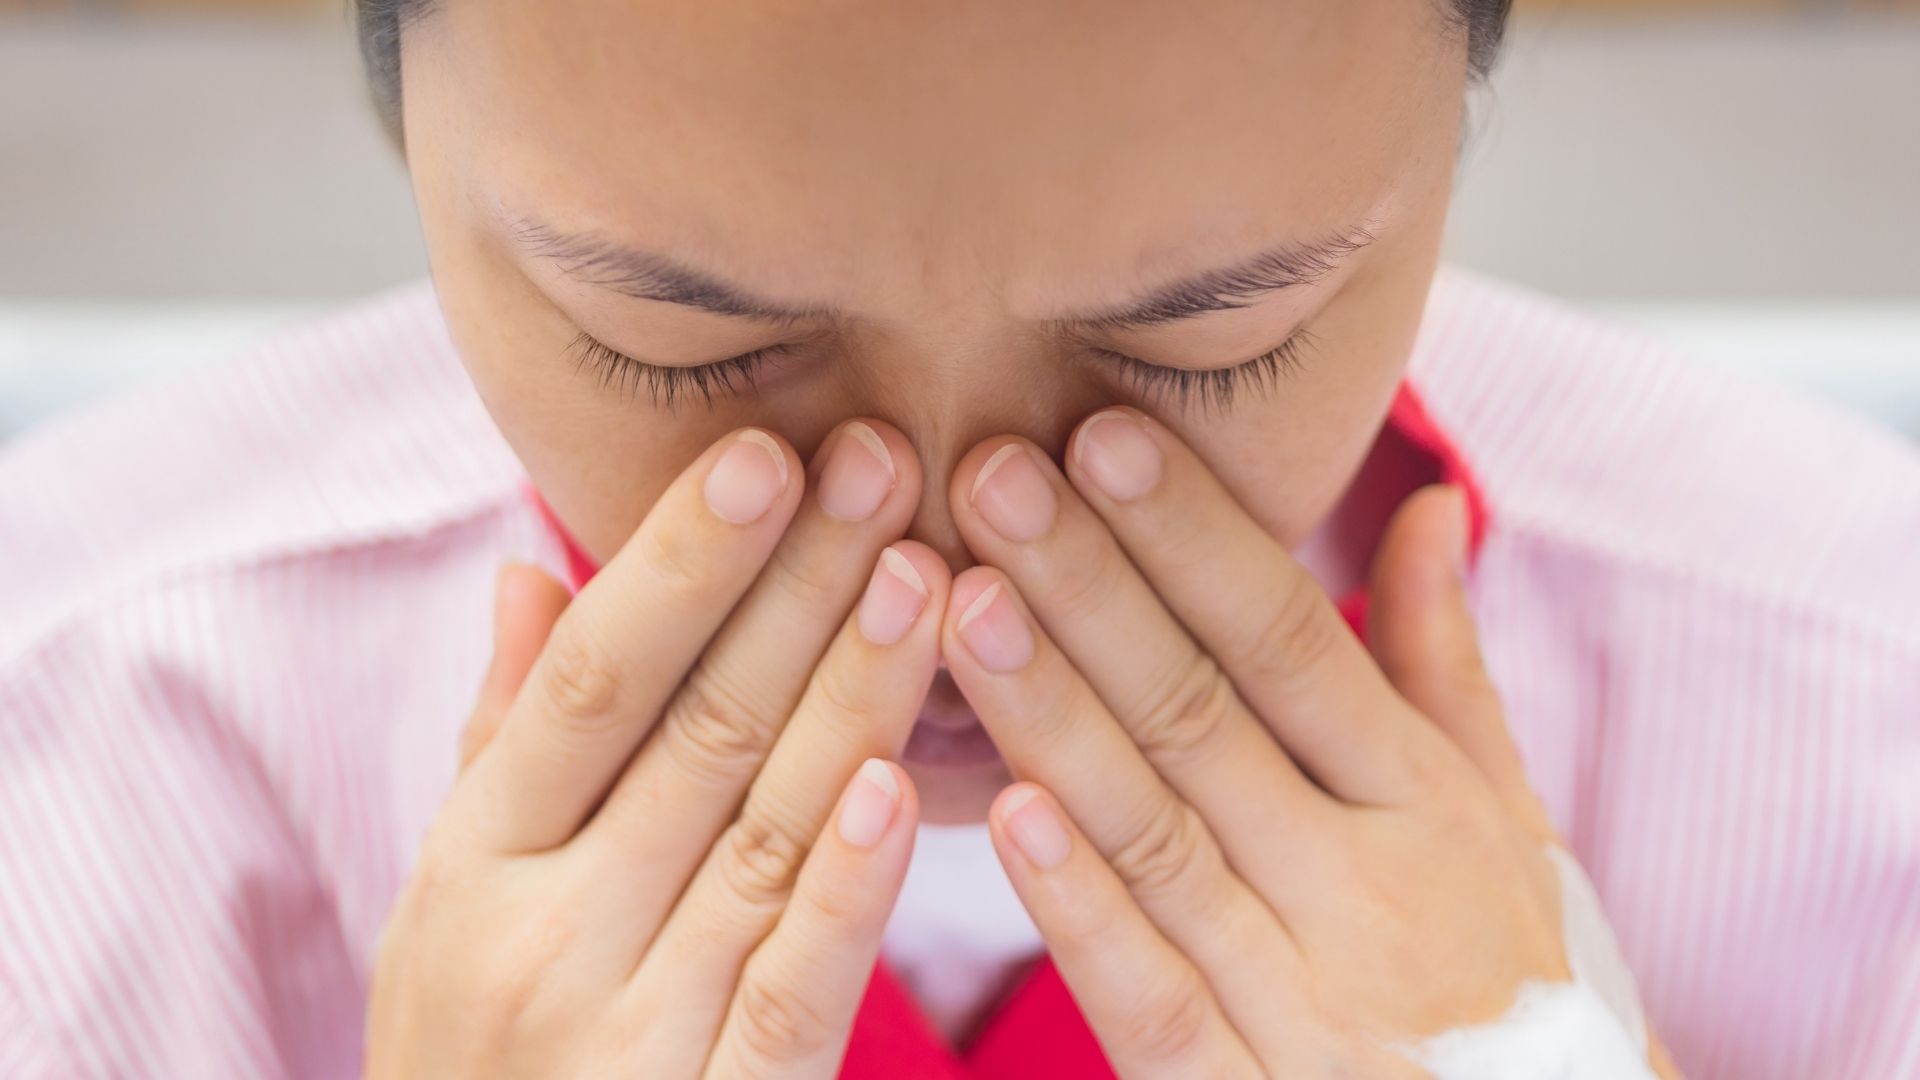 Chronic Rhinitis: What Causes It & Can It Be Cured?